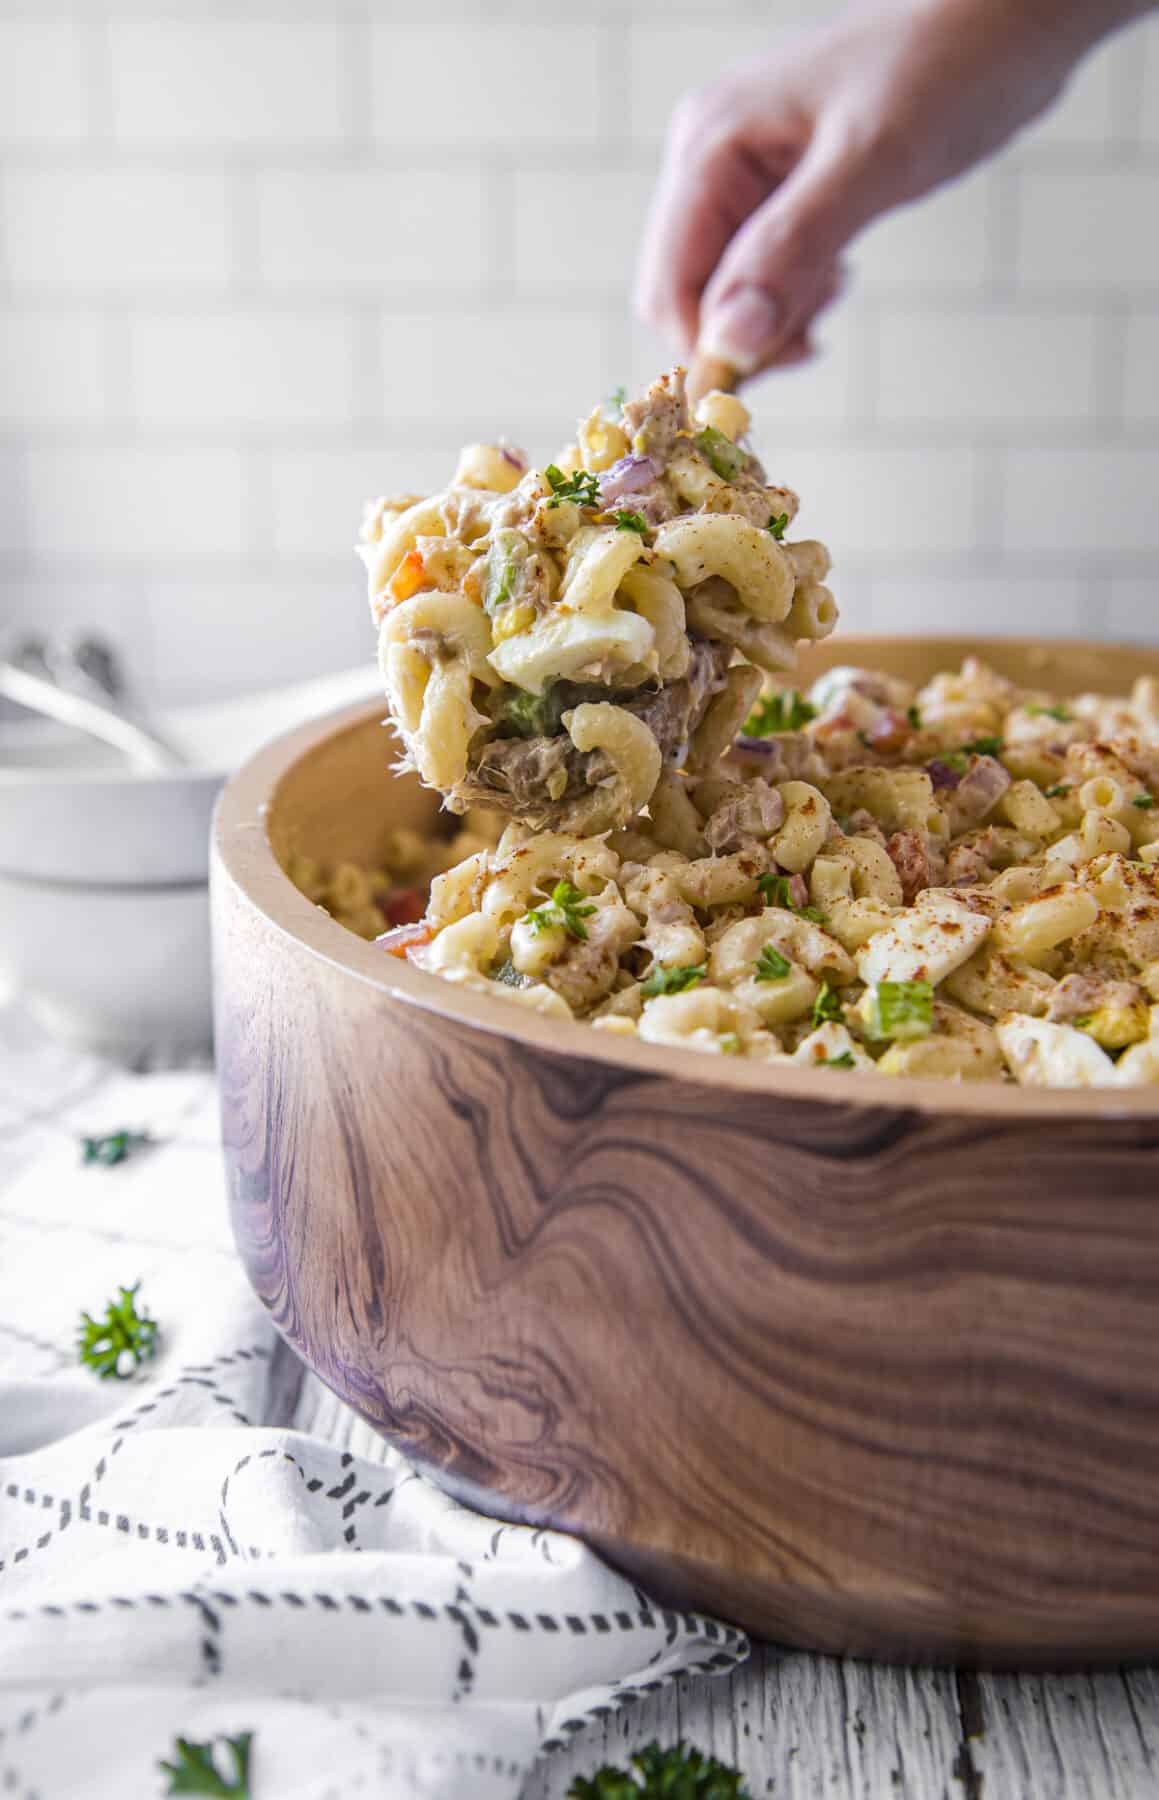 A hand lifting a scoop of tuna pasta salad from a wooden bowl